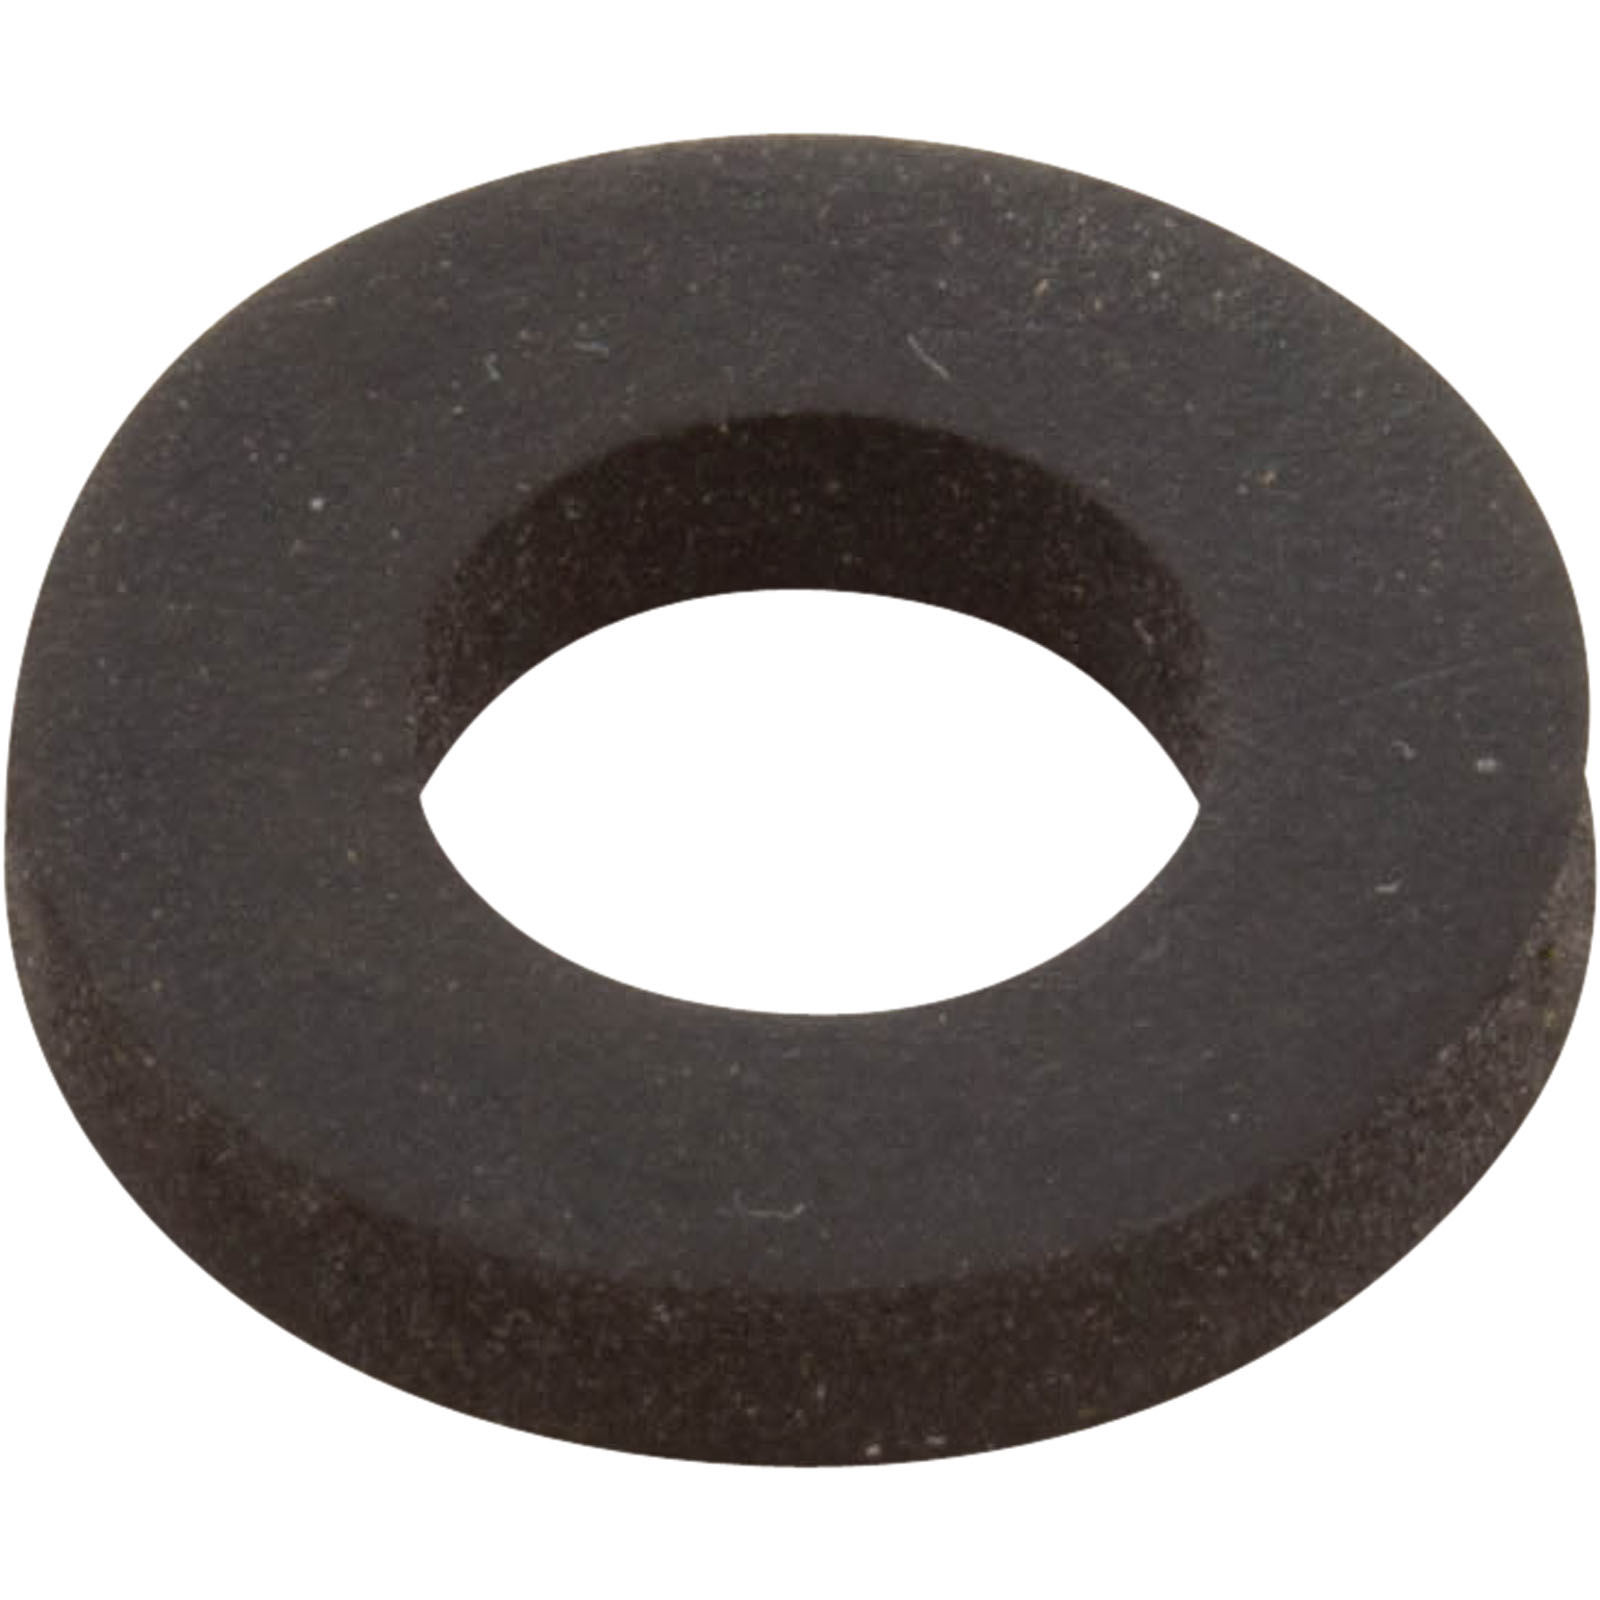 GASKET RUBBER 3/4 quot OD 3/8 quot ID 1/8 quot THICK 90 423 2144